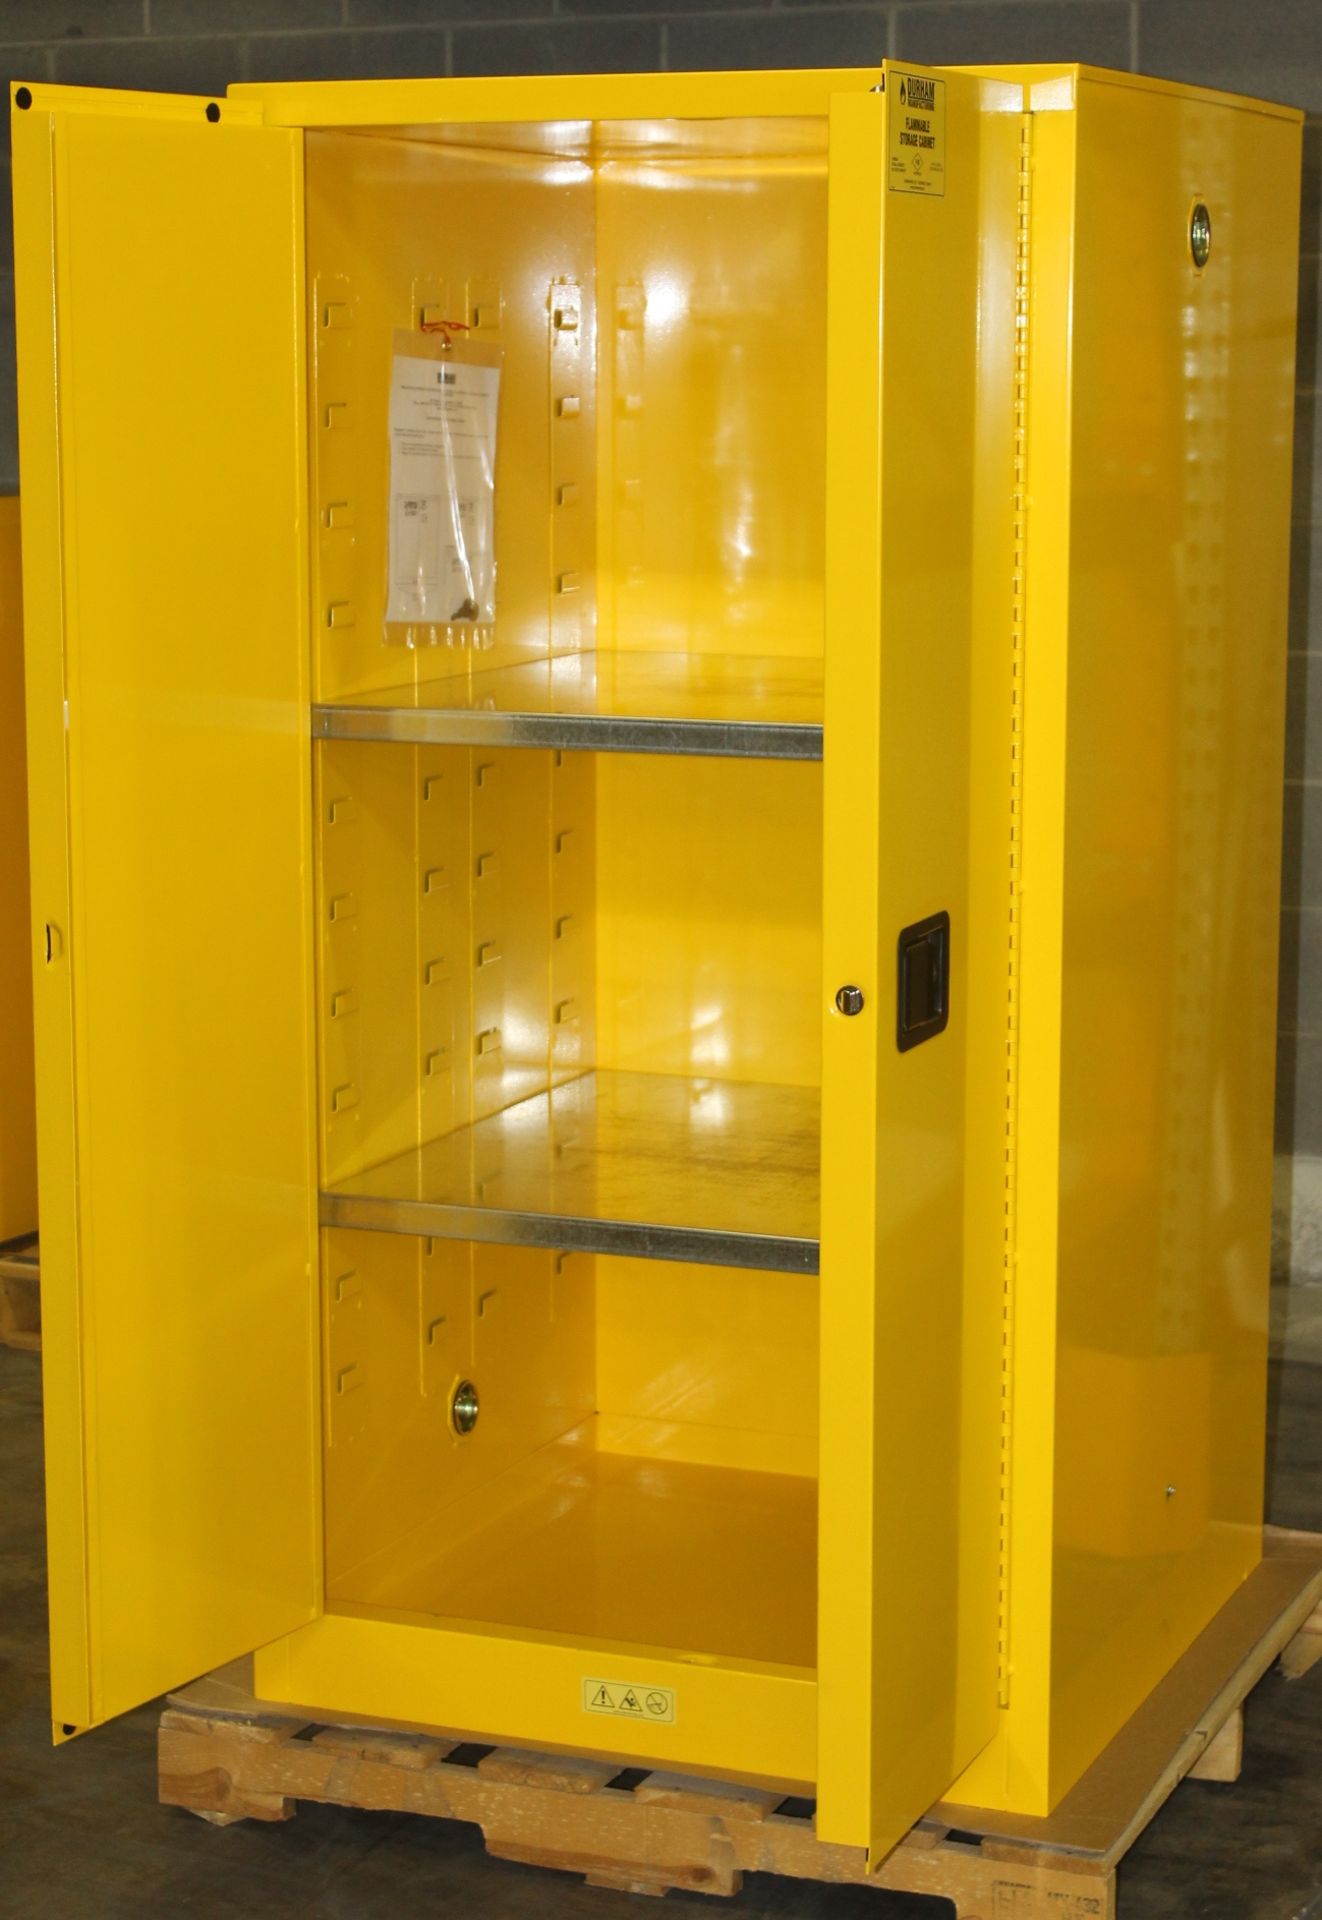 60 GALLONS FLAMMABLE SAFETY STORAGE CABINET,  NEW NEVER USED MODEL: 1060M-50 2 SHELVES 60 GALLONS